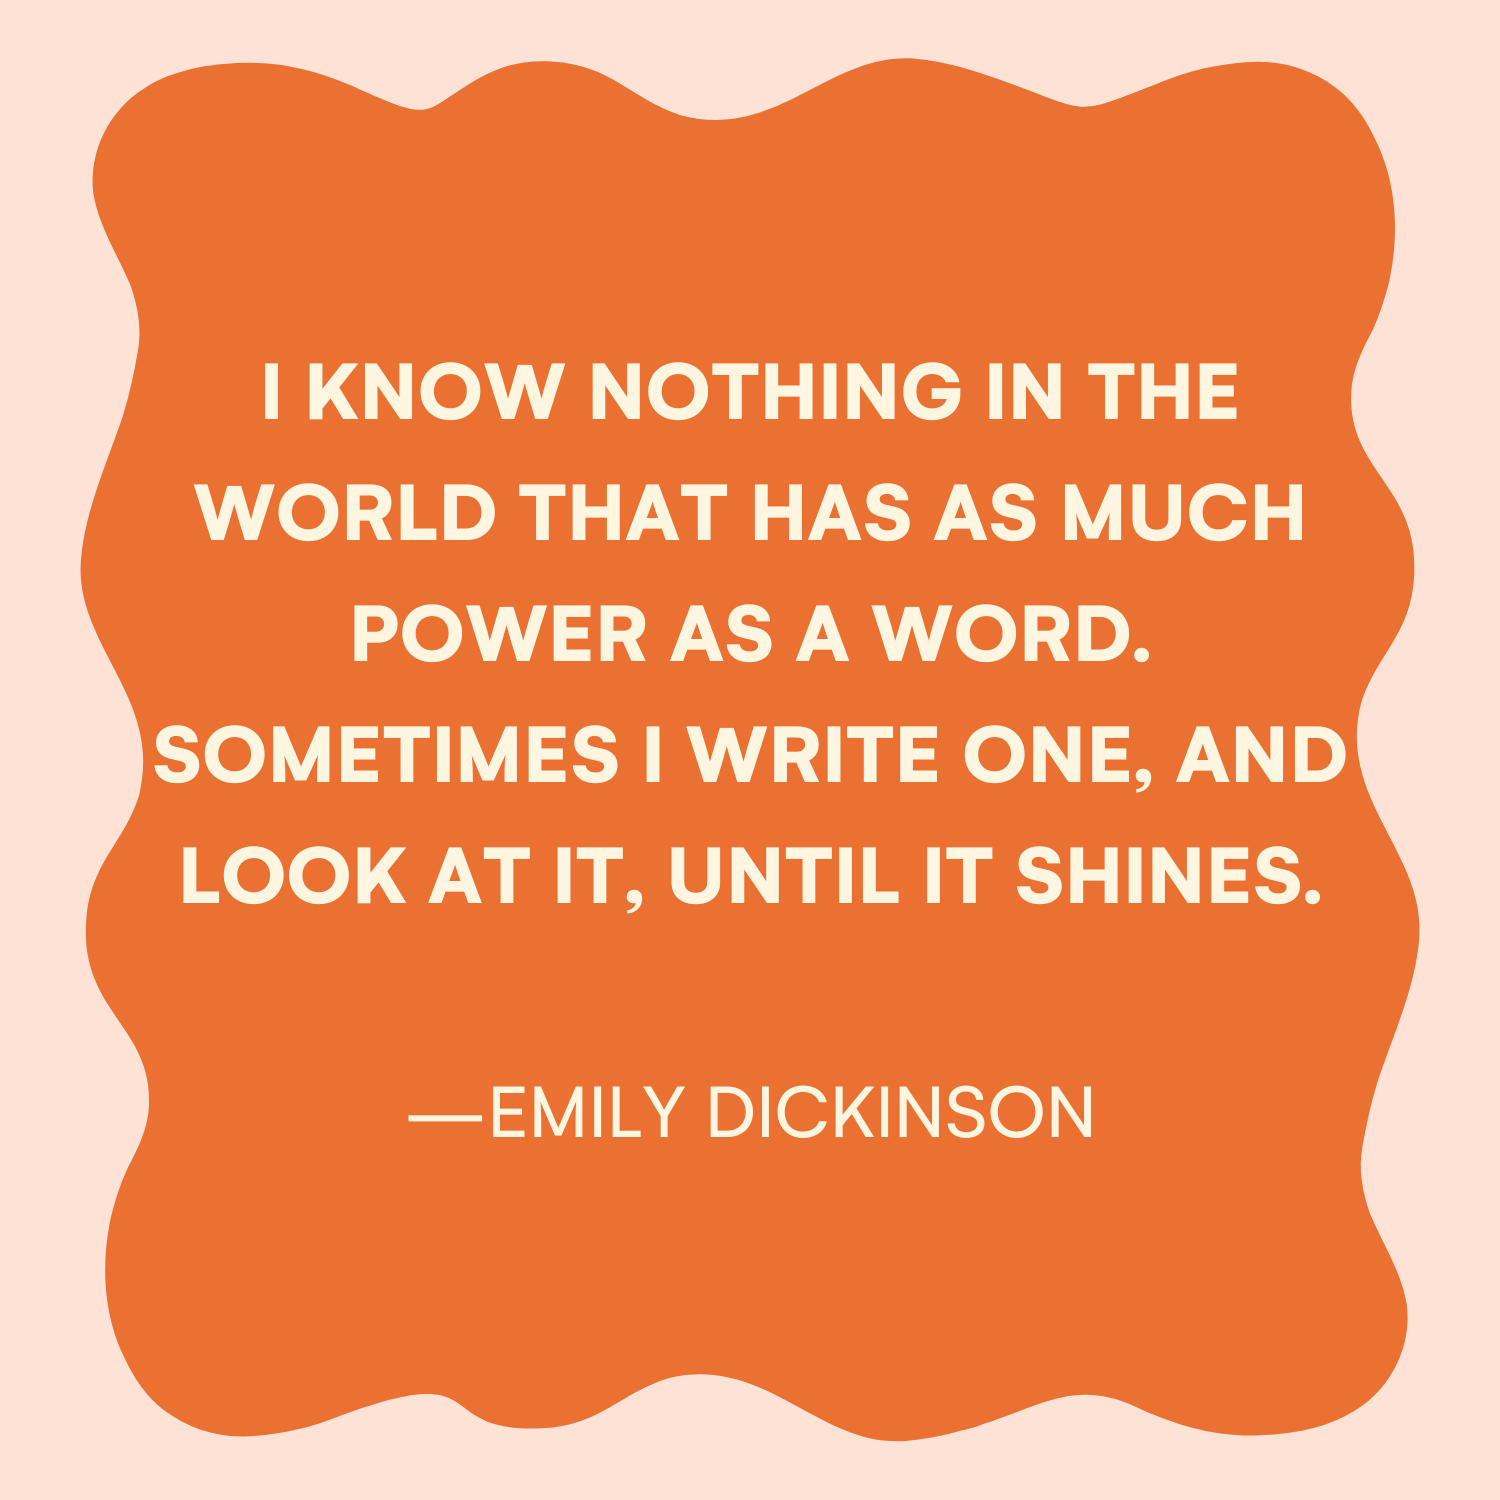 <p>"I know nothing in the world that has much power as a word. Sometimes I write one, and look at it, until it shines." —Emily Dickinson </p>